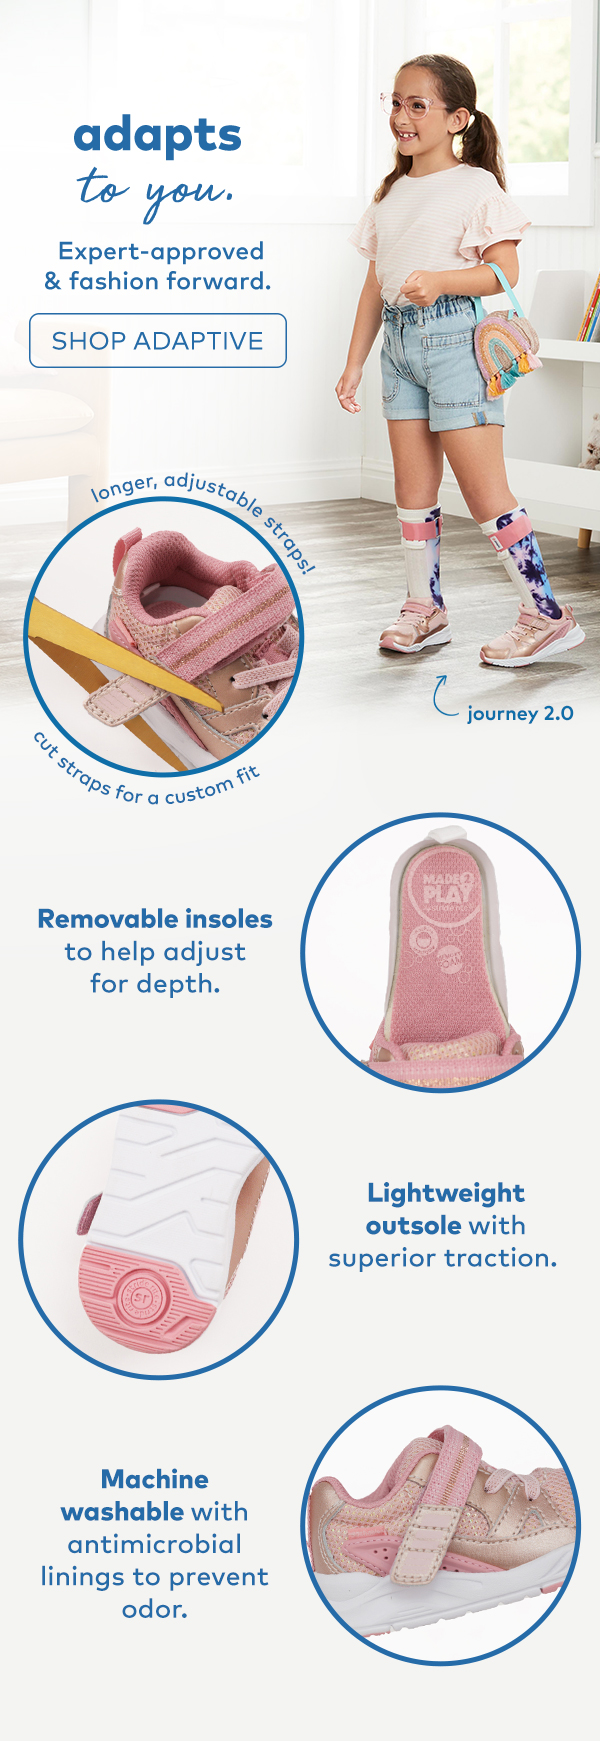 adapts to you. expert-approved & fashion forward. shop adaptive. removable insoles to help adjust for depth. lightweight outsole with superior traction. machine washable with antimicrobial linings to prevent odor.